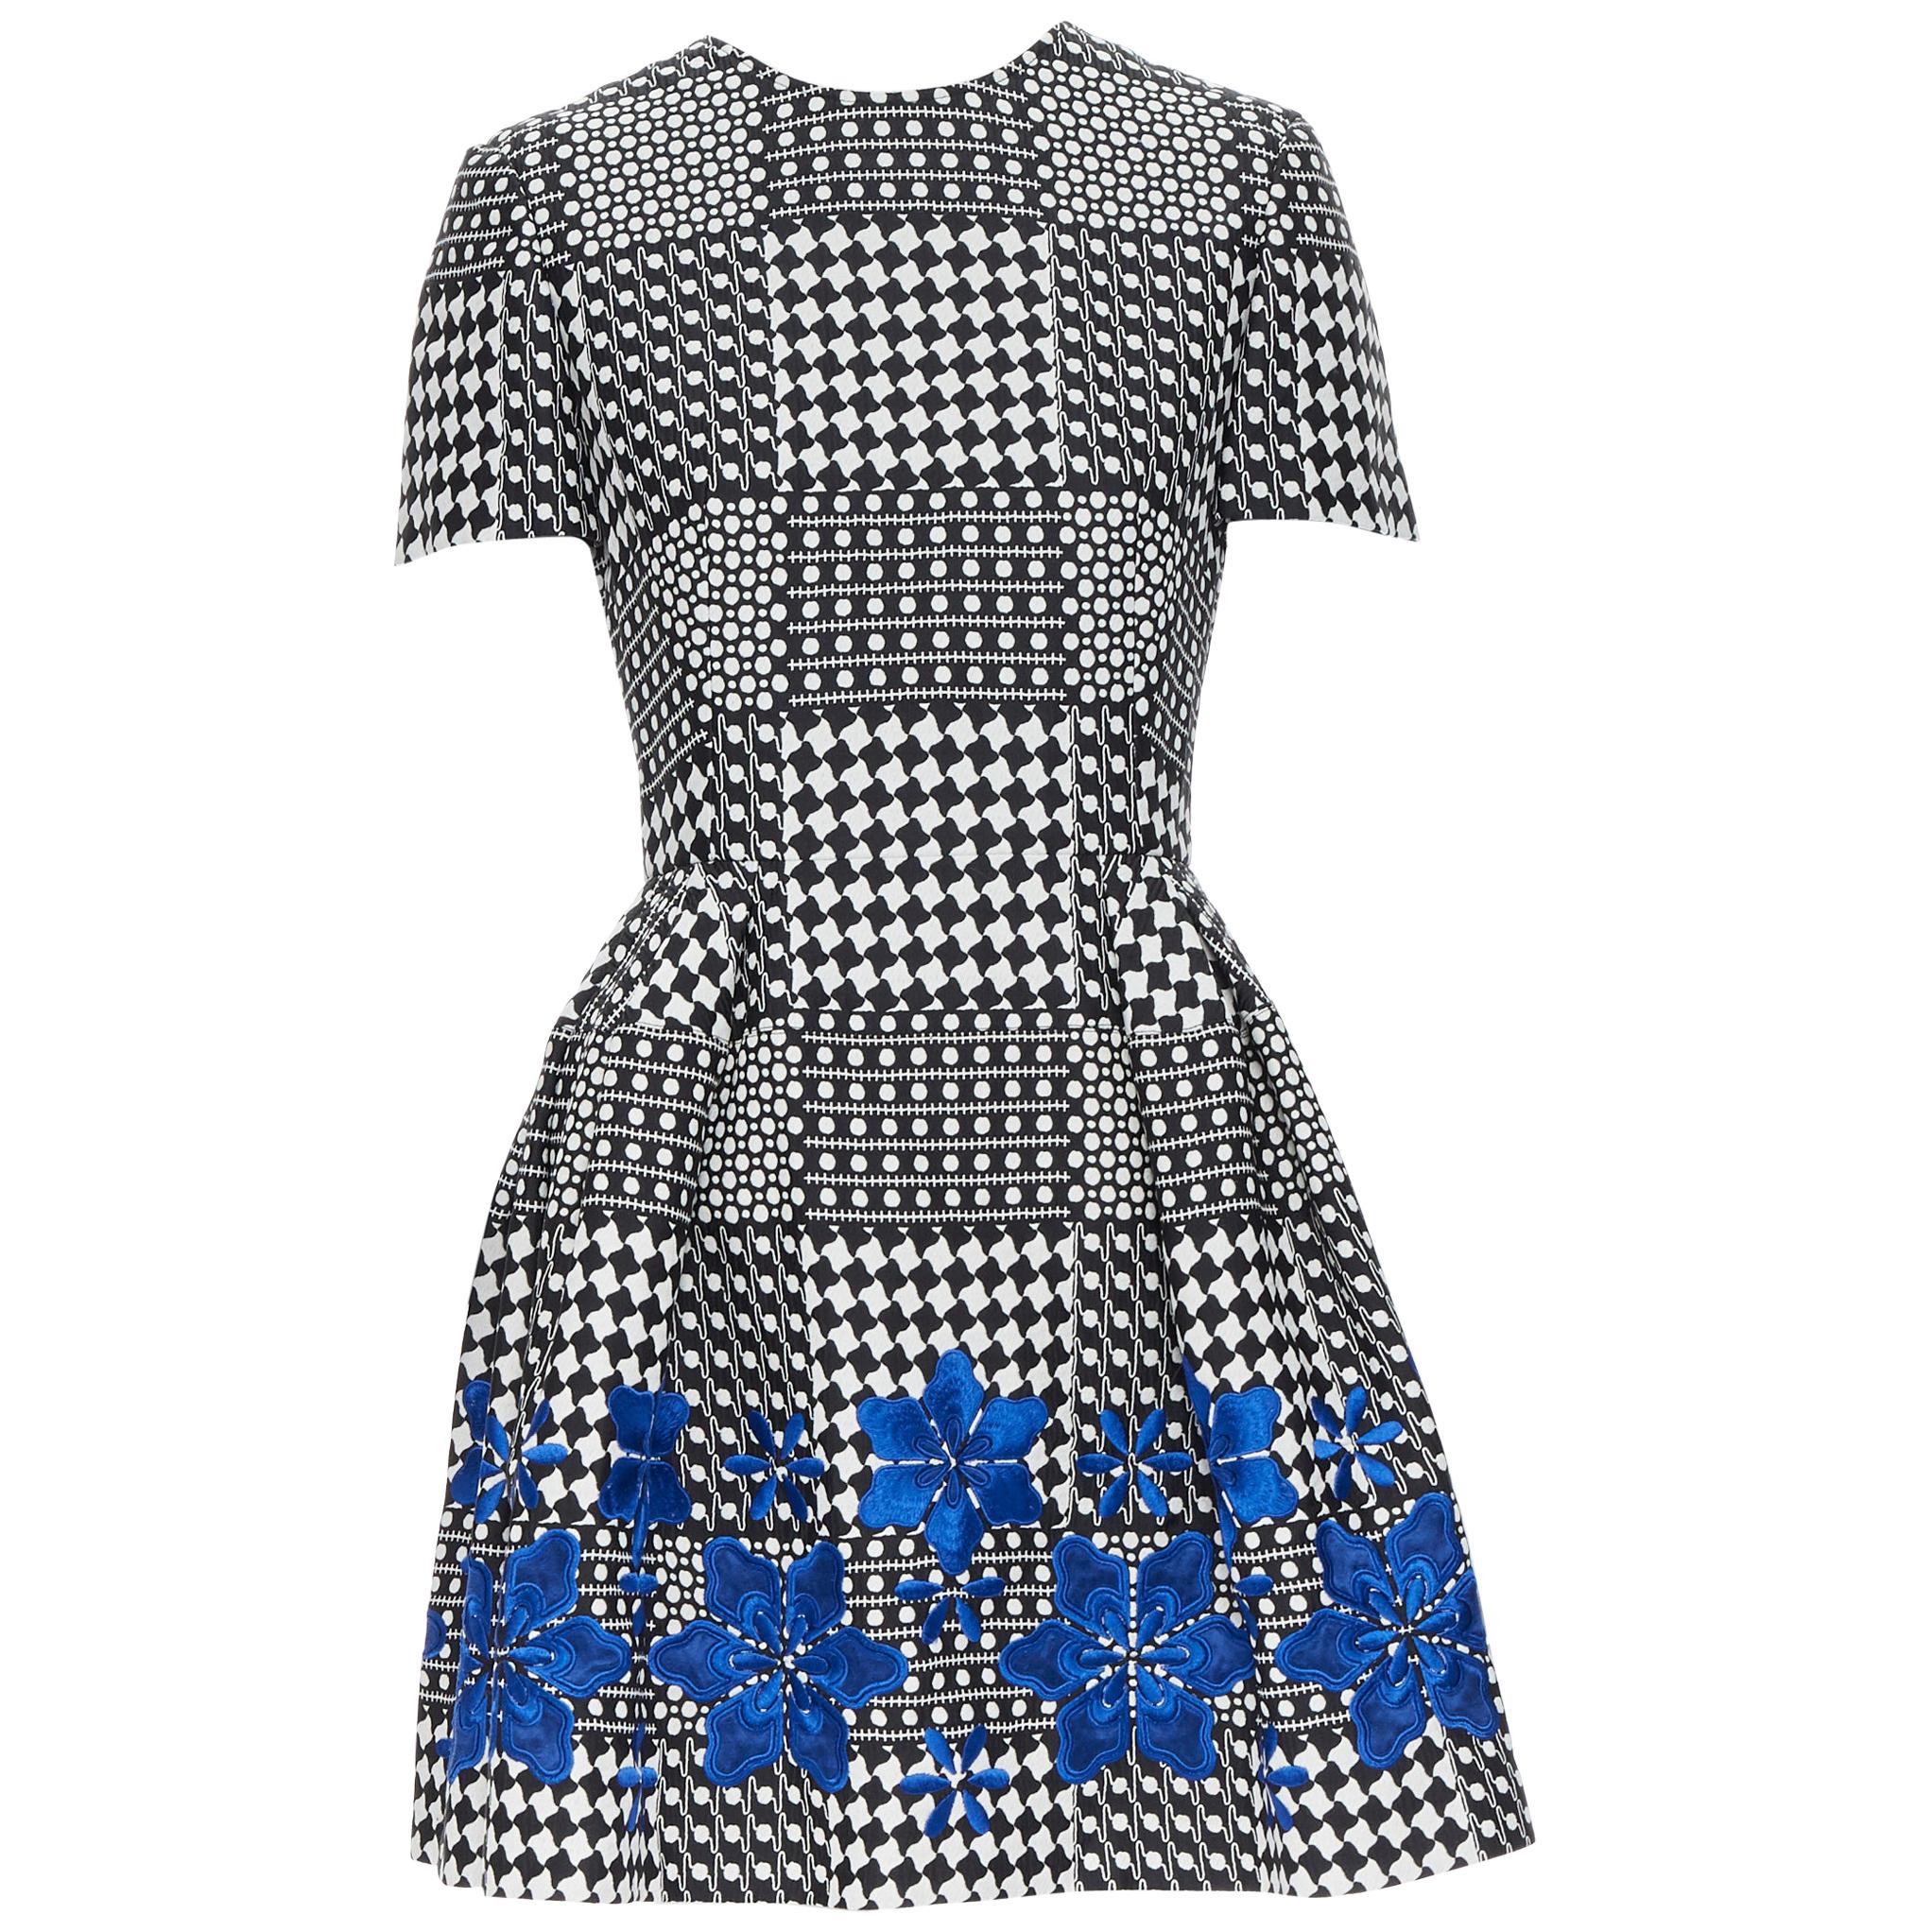 ALEXANDER MCQUEEN black white geometric blue floral embroidery fit flare dress S